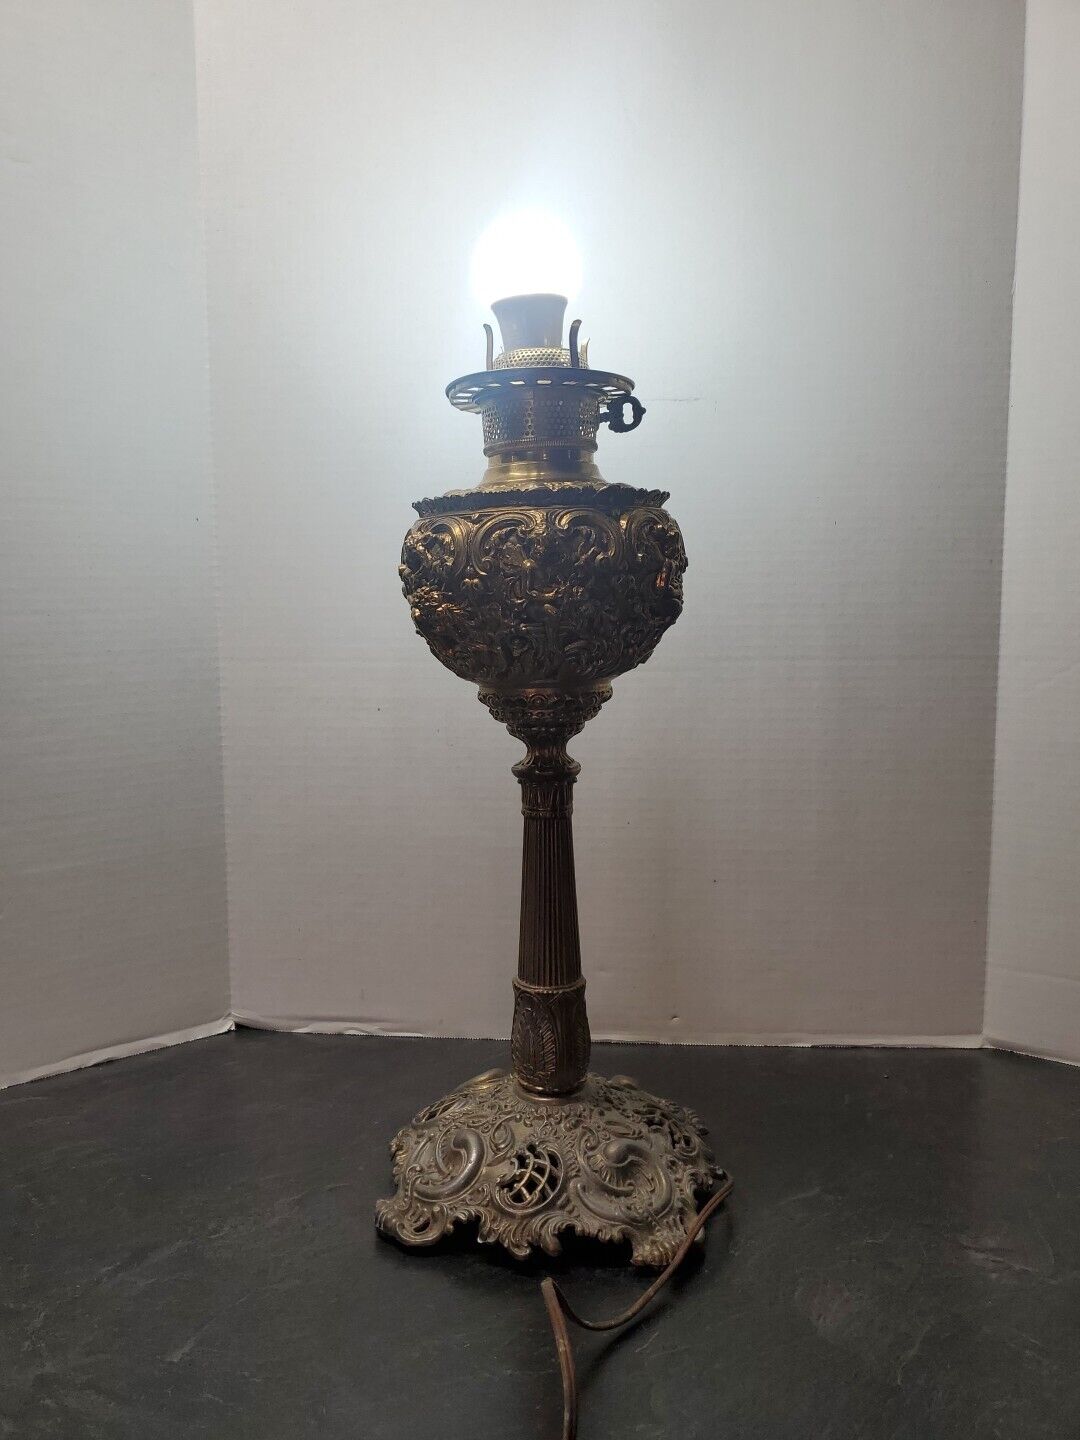 Brass Banquet Oil Lamp Converted to Electric Cherub Design S.S.N.Y Vintage